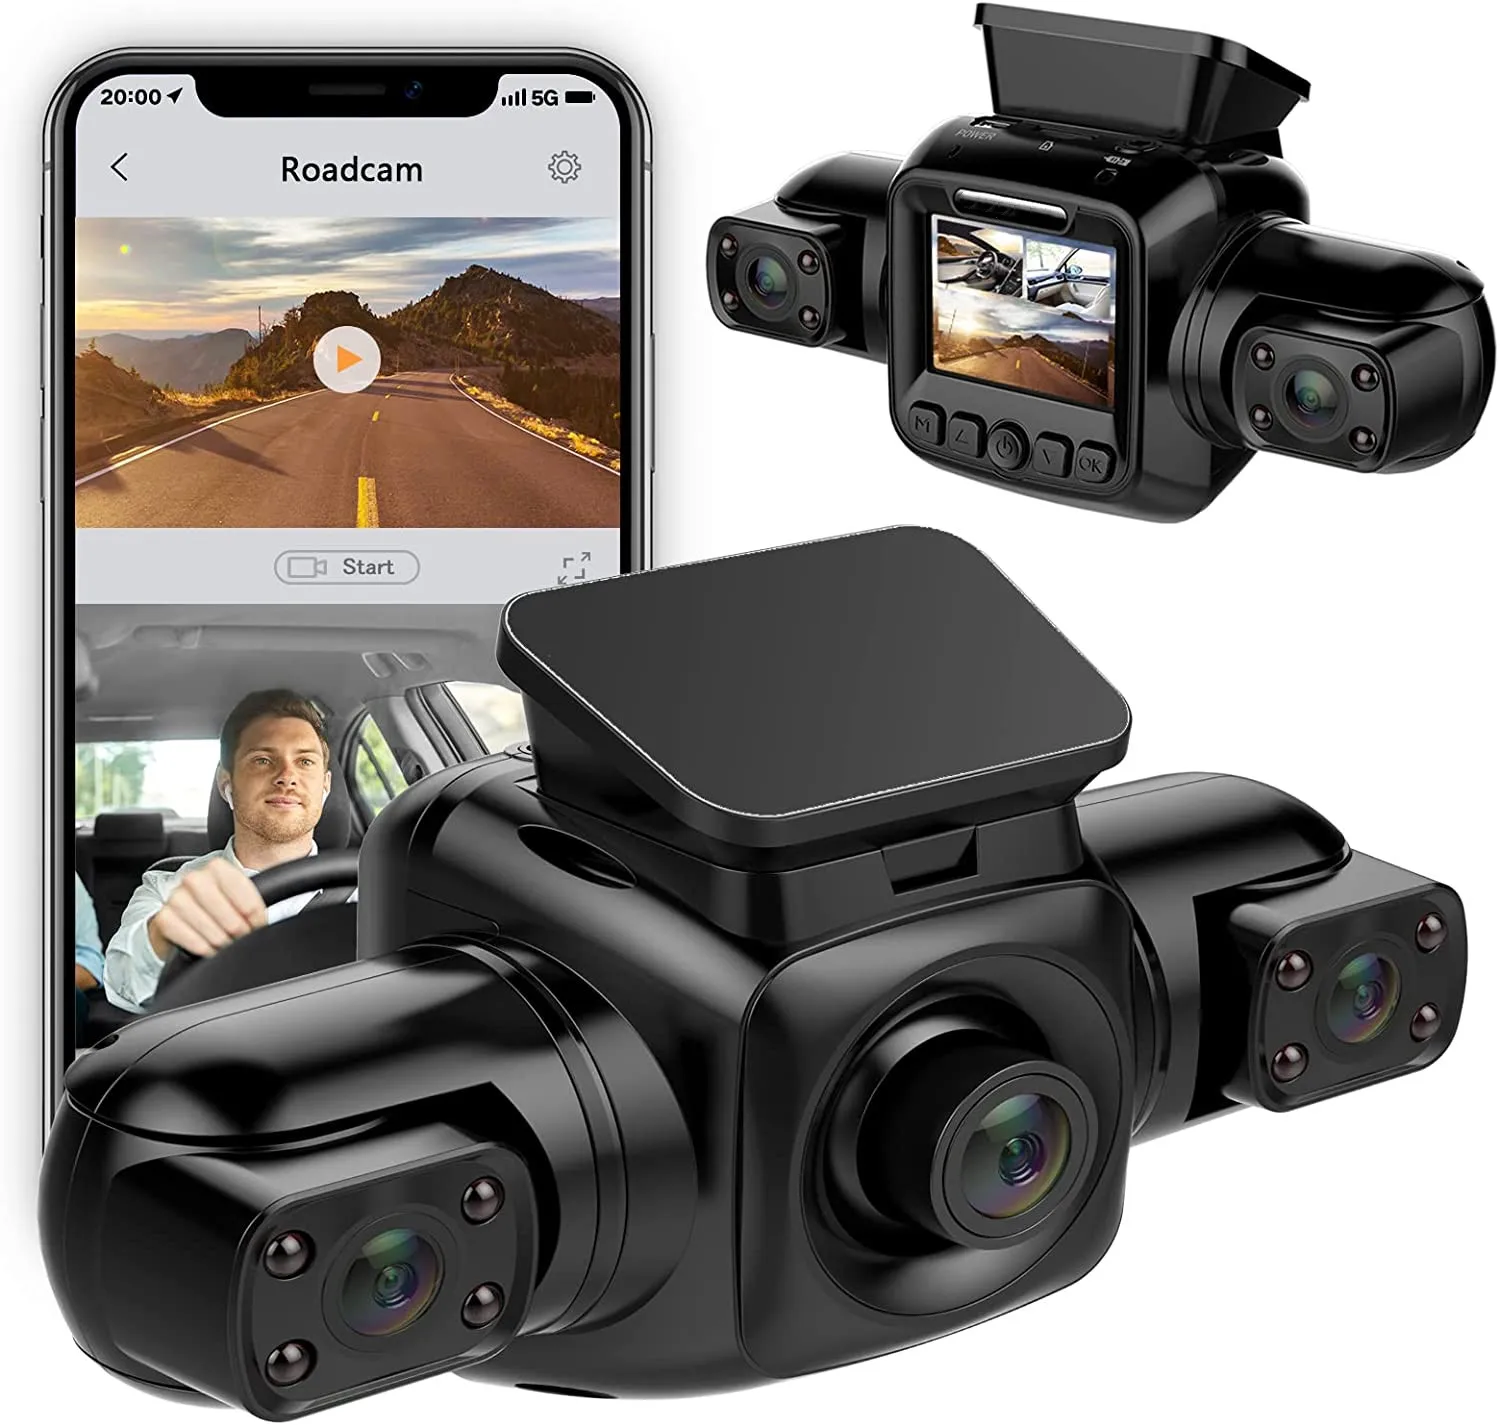 3 Channel Dash Cam 3 Cameras 1080P Dashcam Dashcam Built-in WiFi Front and Rear HD Lenses Infrared Night Vision Video Recorder